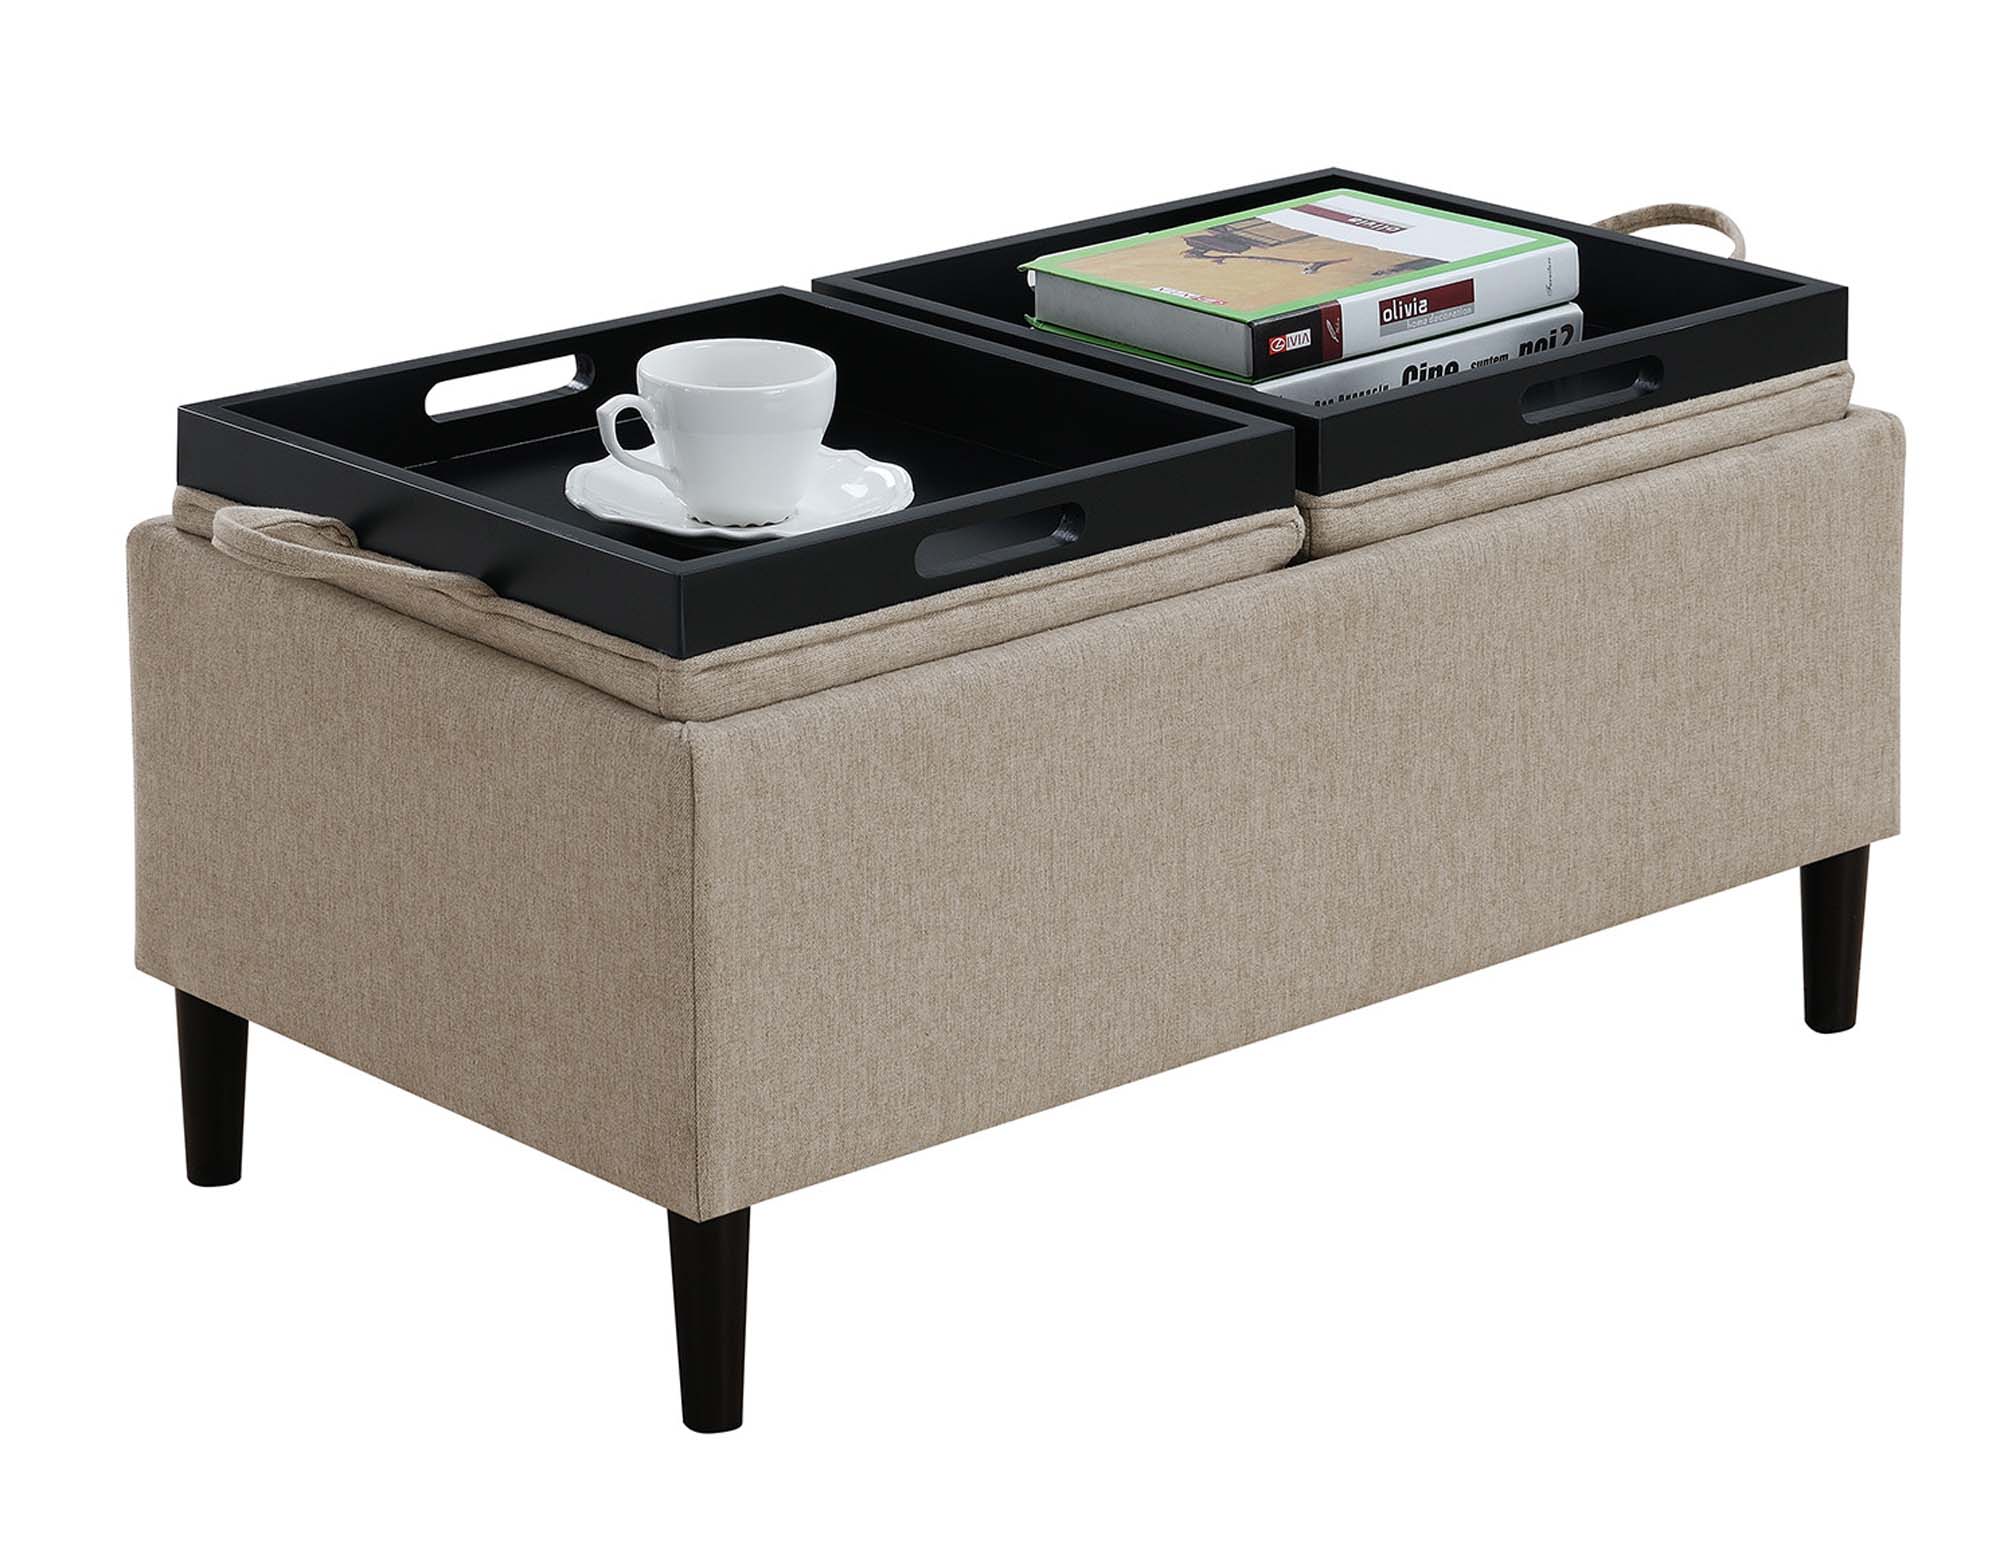 Convenience Concepts Designs4Comfort Magnolia Storage Ottoman with Trays - image 2 of 4